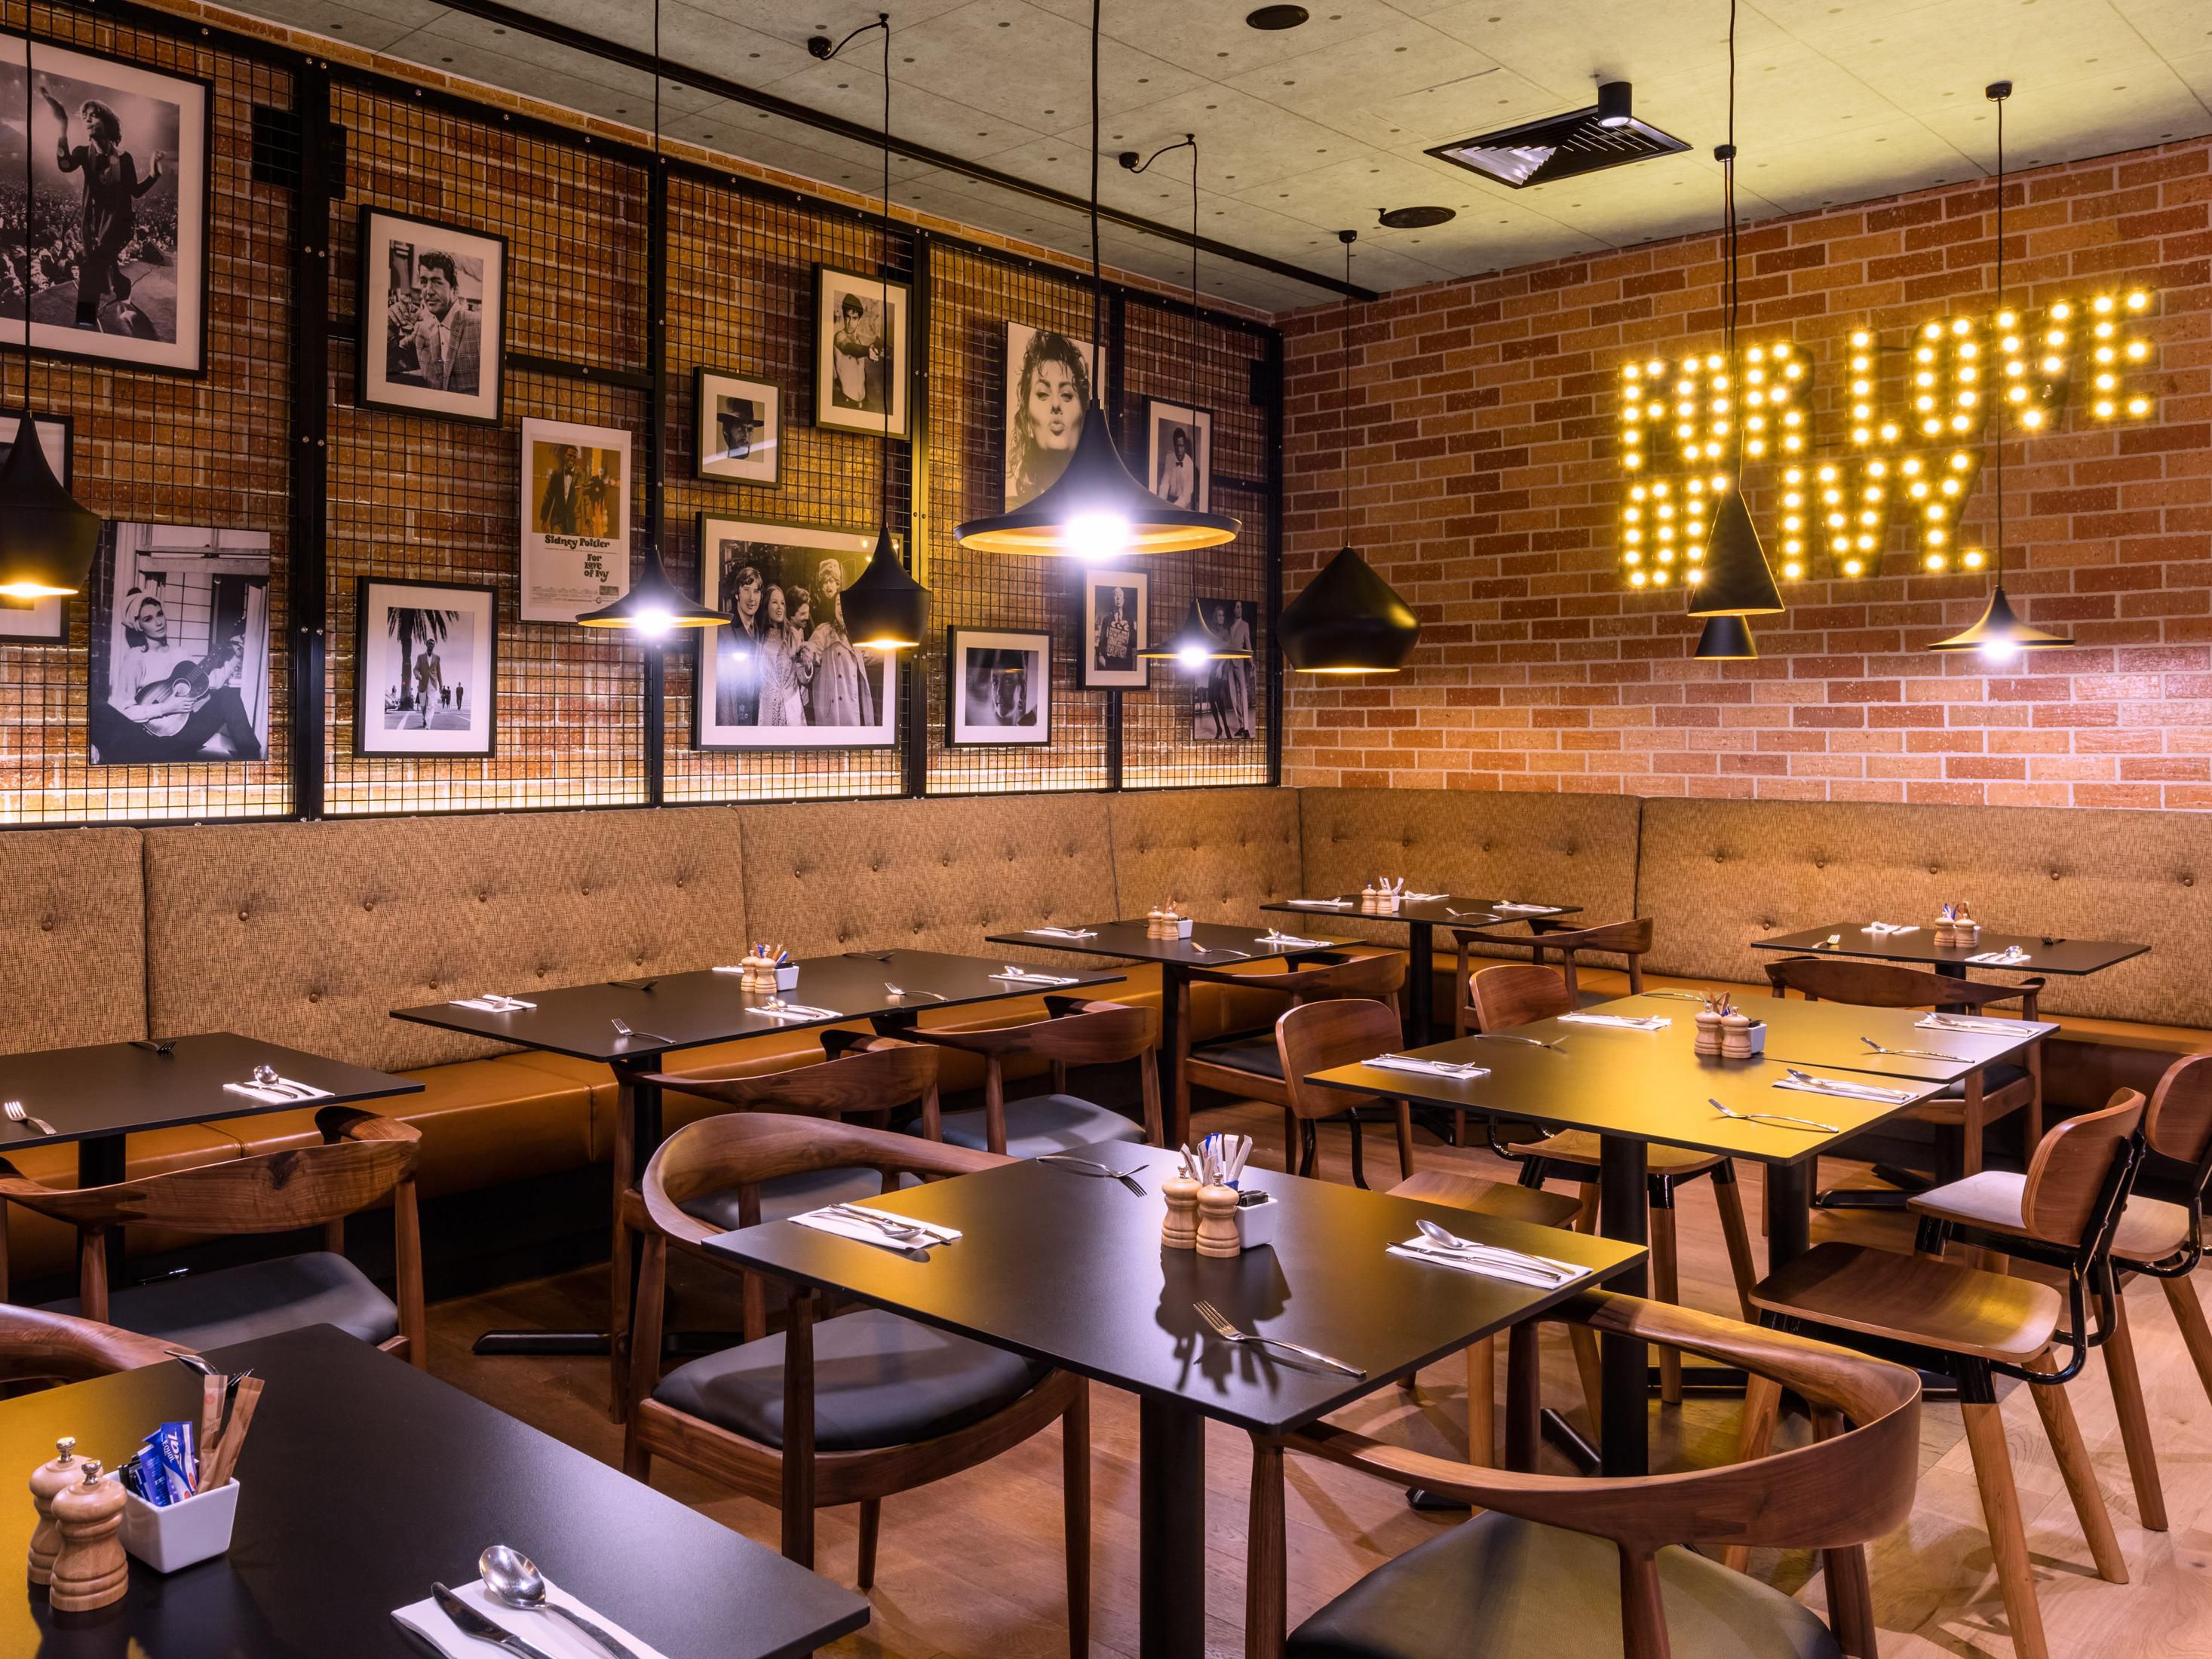 Once home to the old Town Cinema, this urban industrial-chic restaurant is open all day for breakfast, lunch and dinner. Experience a carefully crafted menu, showcasing divine fresh WA produce. From breakfast on-the-go to shared platters and cosy dinners, Ivy & Jack has something for everyone.